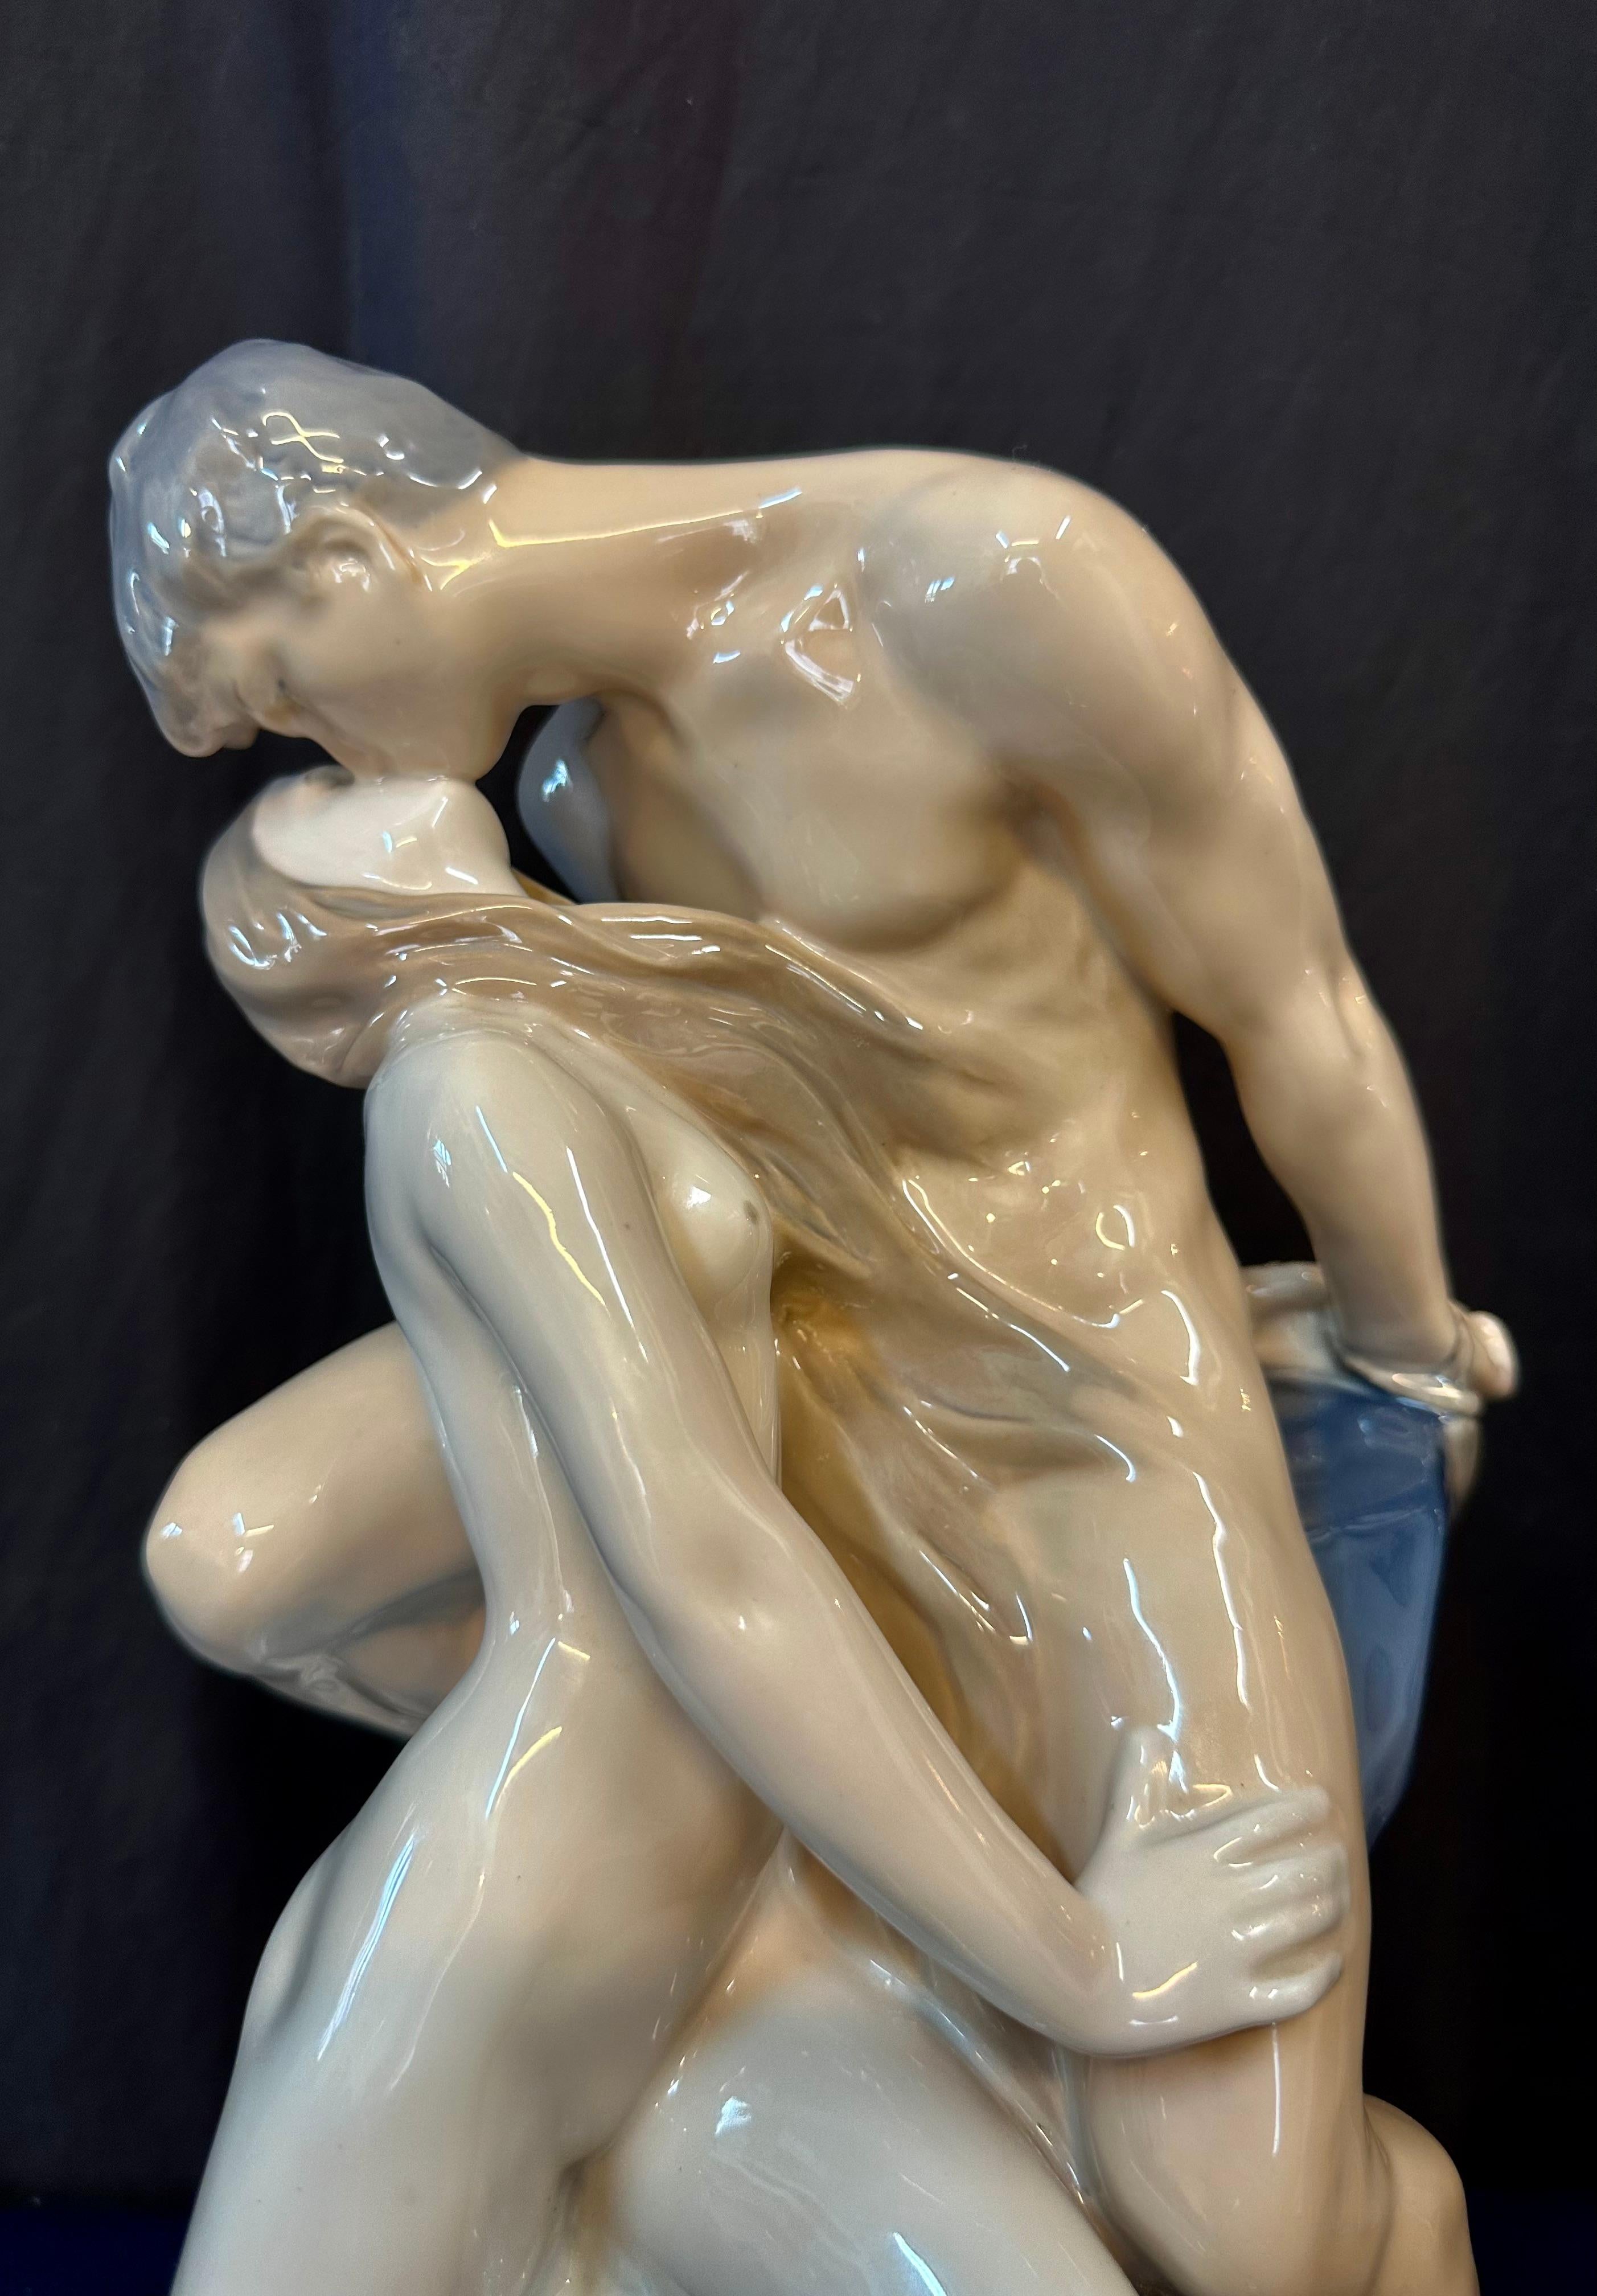 This vintage mid 20th century Continental porcelain statue was designed by the Royal Copenhagen Company of Denmark. It has a few titles, the most well known being “The Wave & the Rock”. It depicts a seductive water nymph ravishin g her male captive